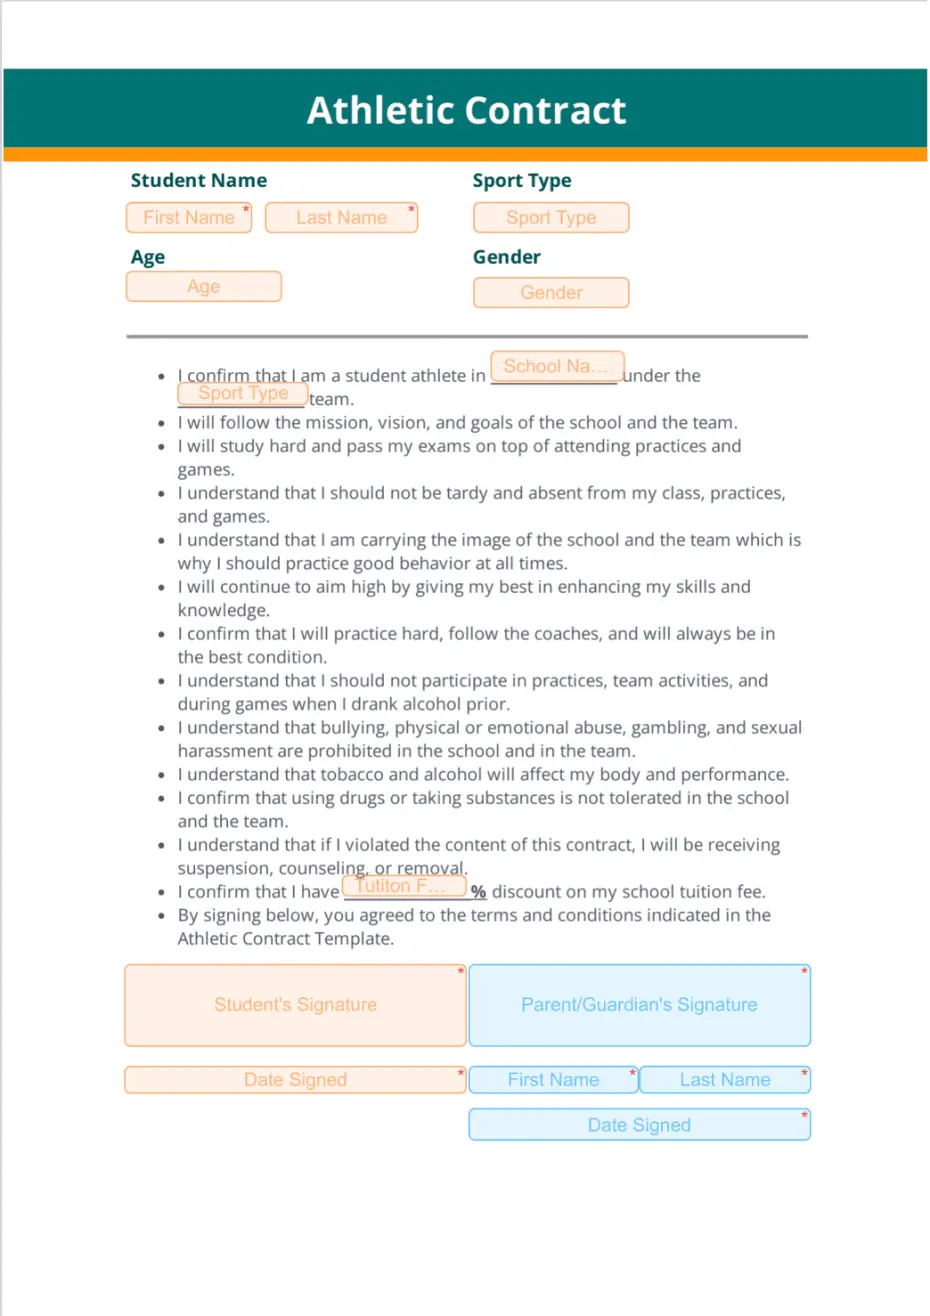 Athletic Contract Template